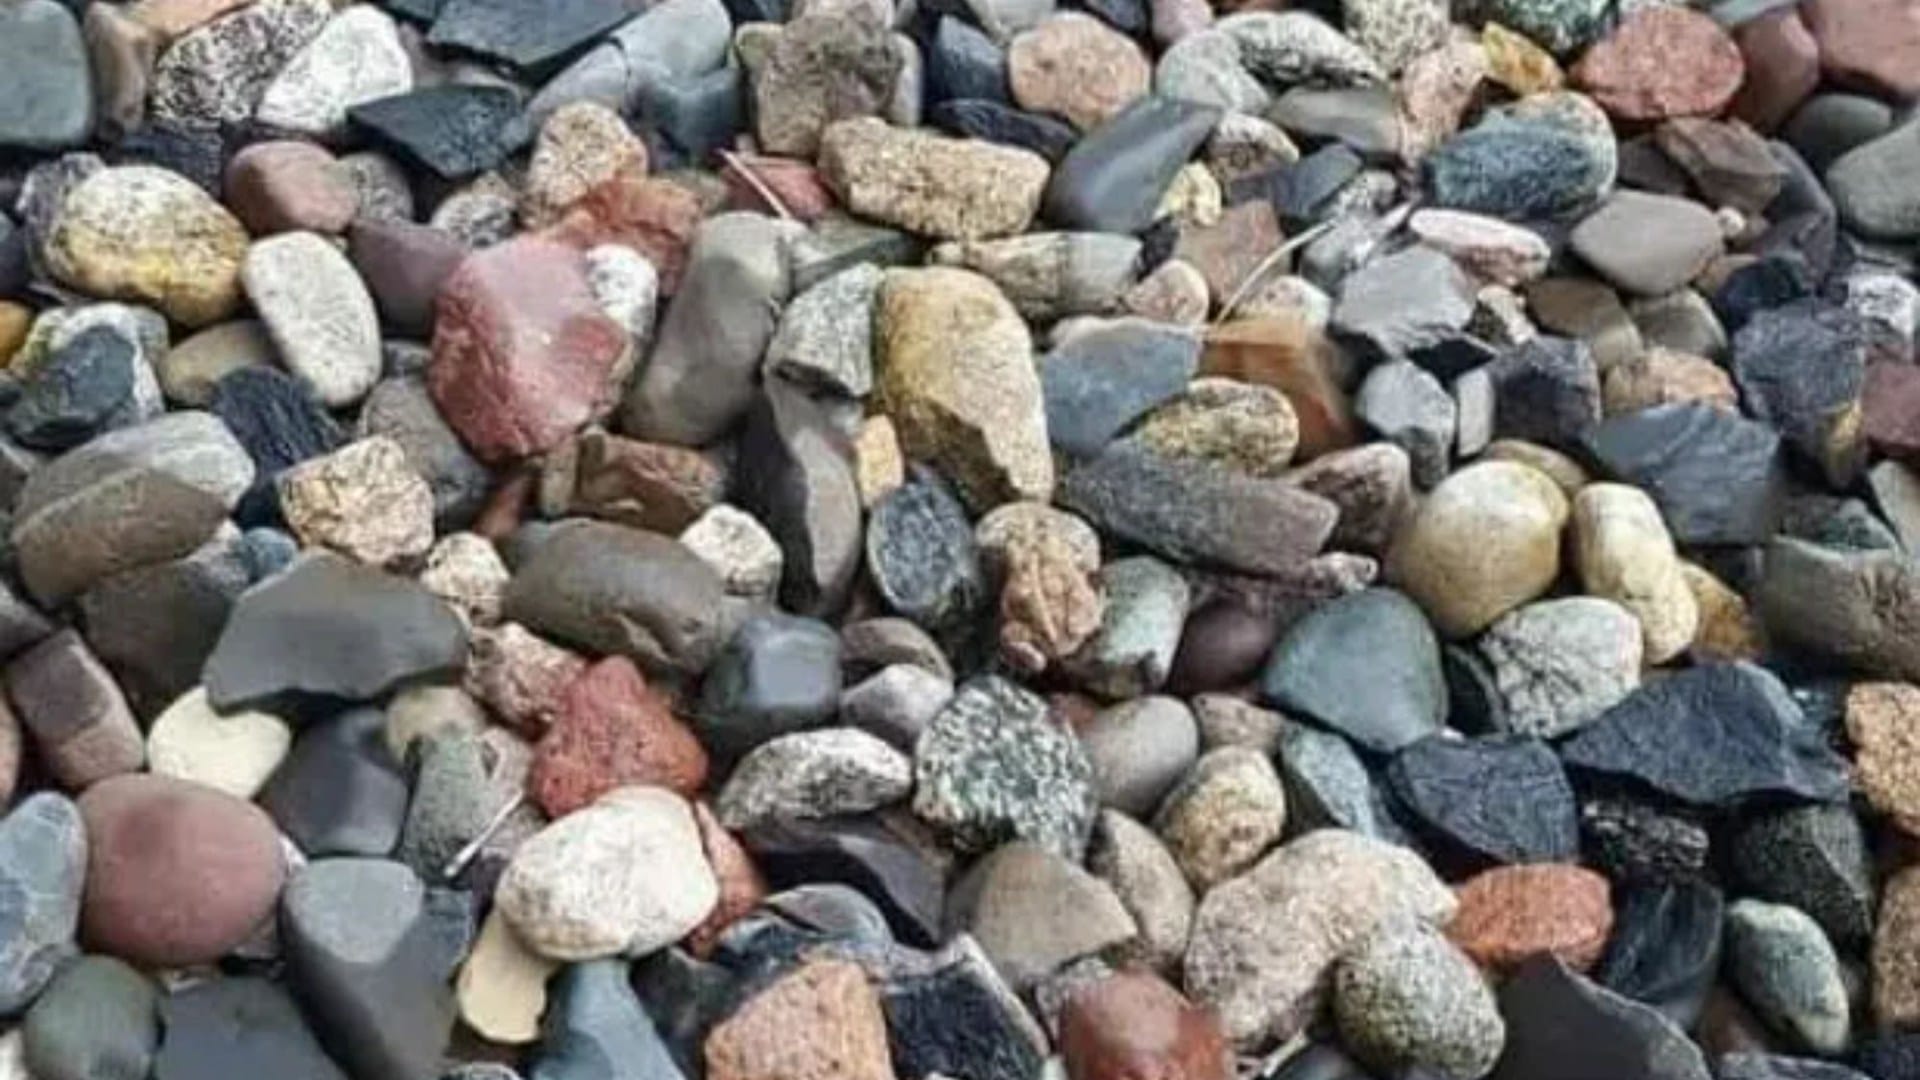 You could have 20/20 vision if you can spot the sneaky frog sitting on the stones in just 8 seconds